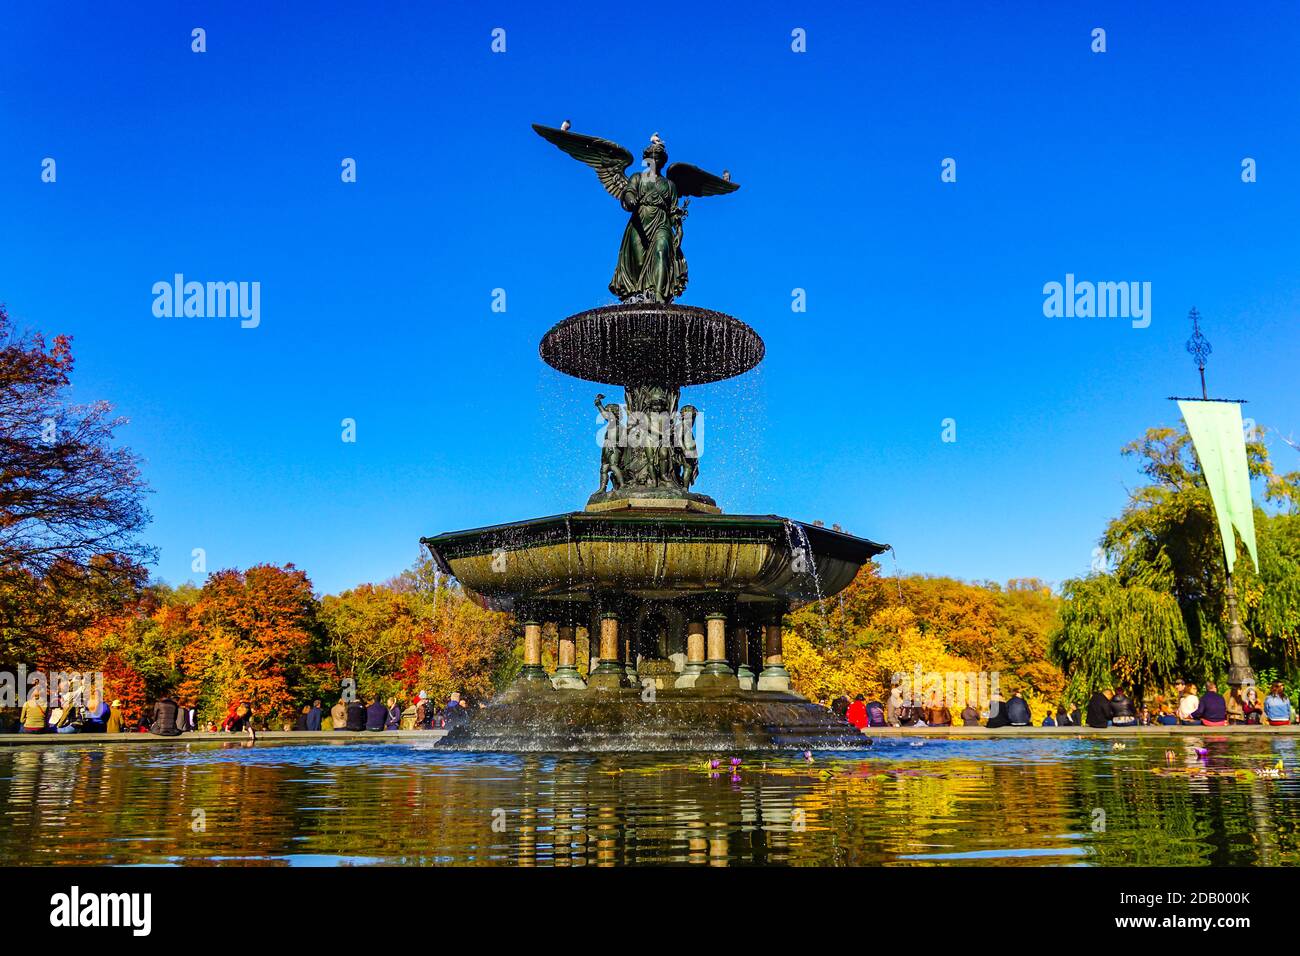 Nothing like a crisp autumn day at Bethesda Fountain